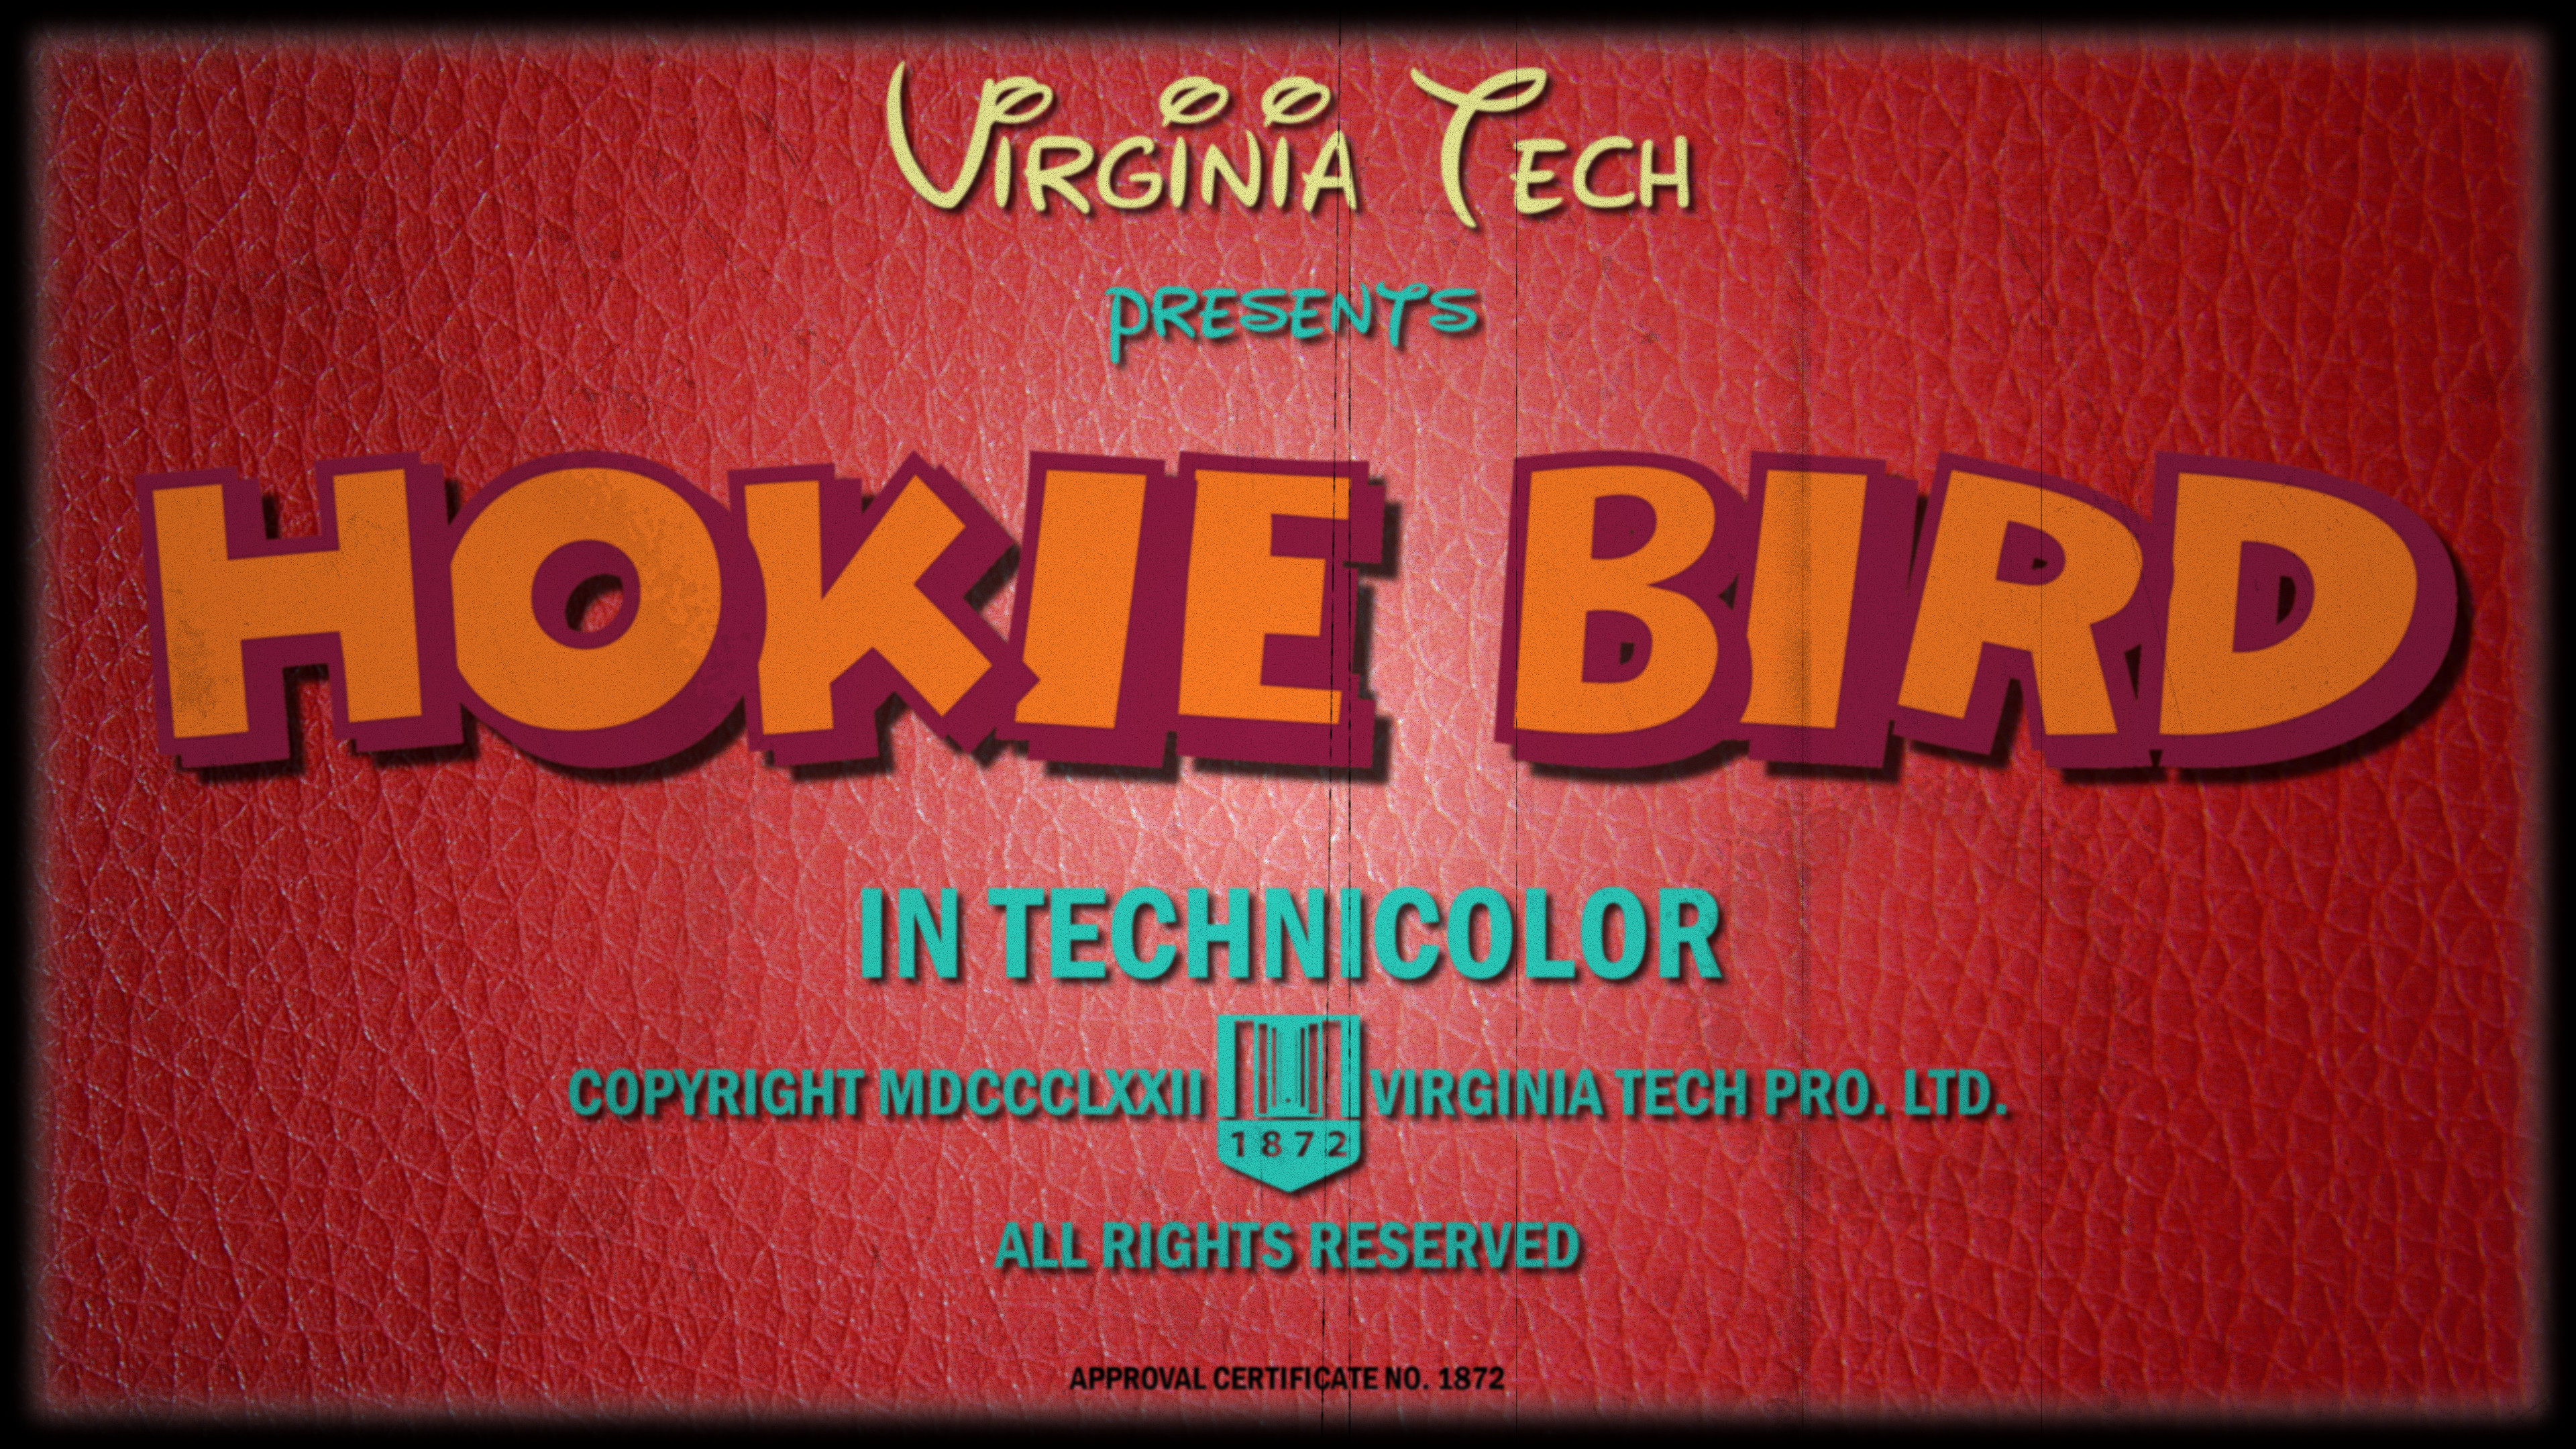 3840x2160 ... Hokie Bird instead of Virginia Tech. I think it actually looks a lot  better, so thanks!